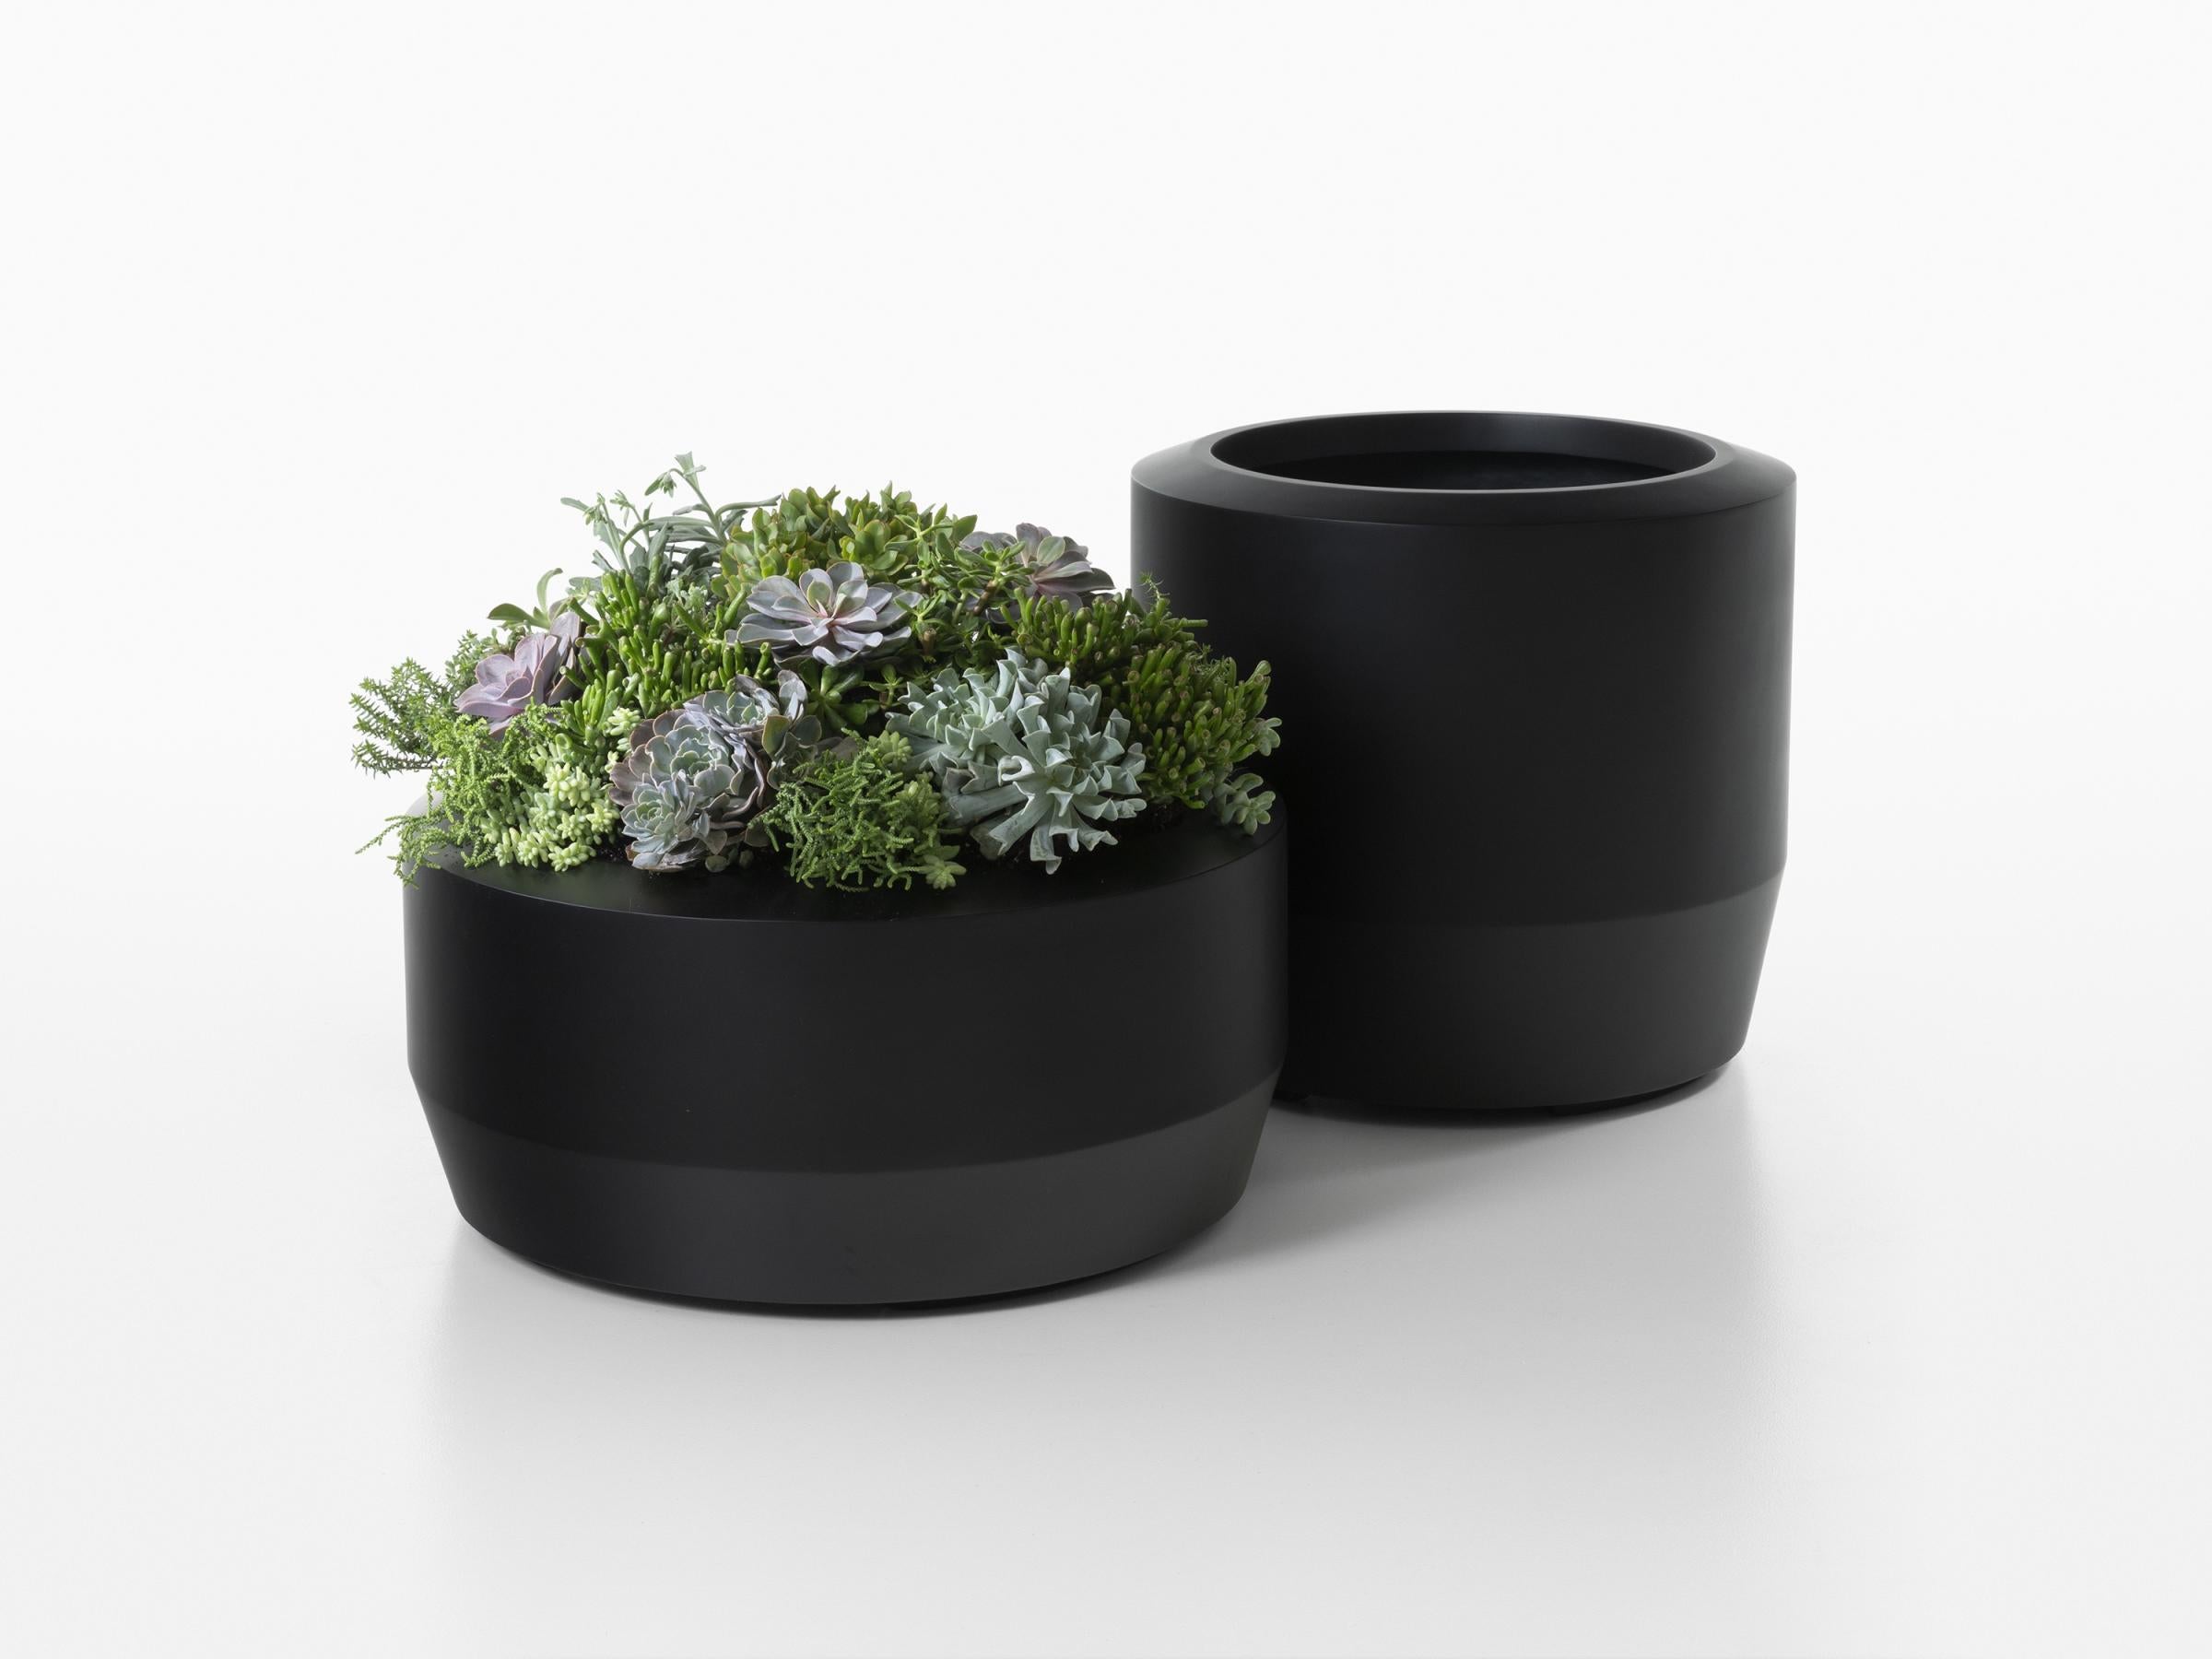 American HOLLY HUNT Fugu Small Hollow Cast Concrete Outdoor Planter in Abyss Black Finish